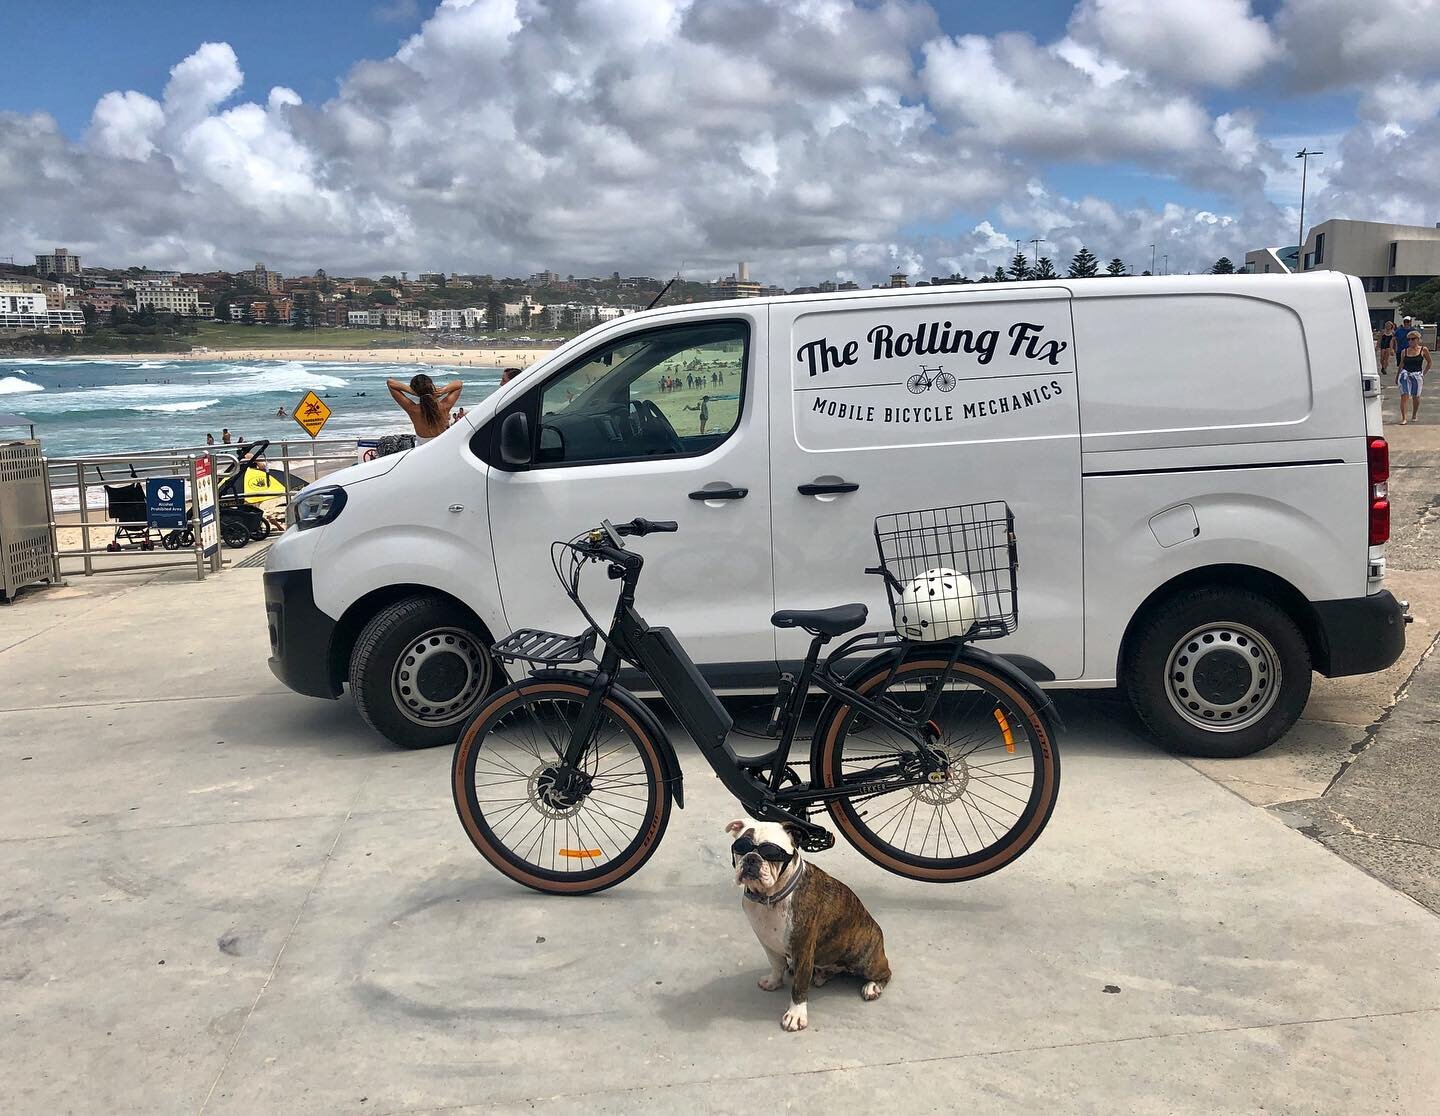 Zoom in on dog

New bike day